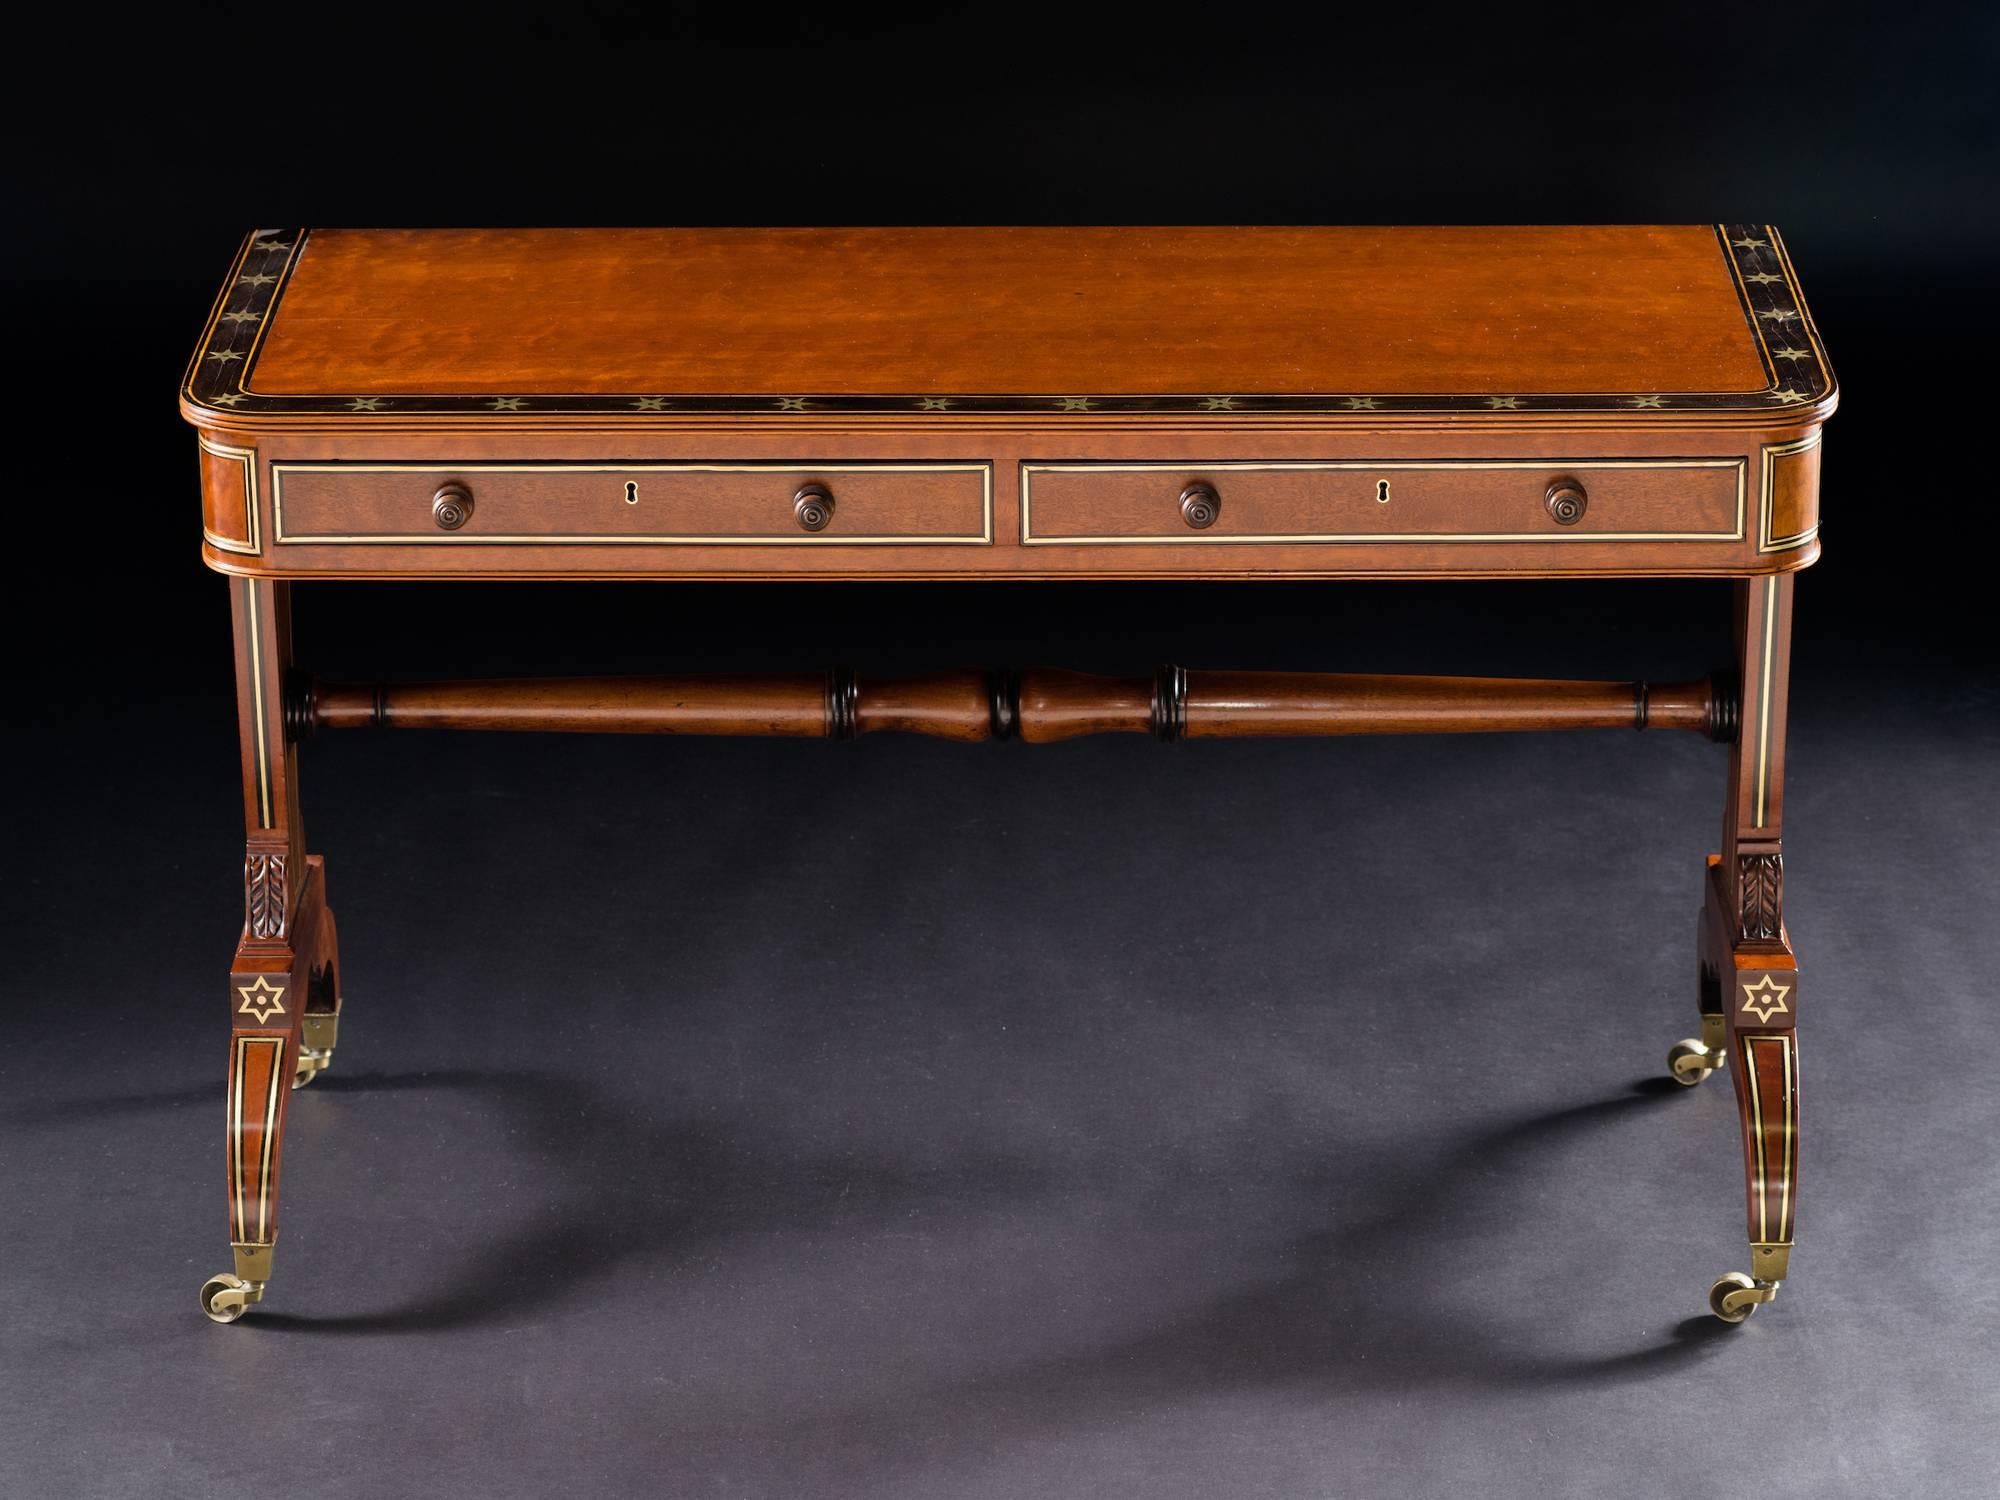 The hinged top with ebony and brass inlaid star border, above two cedar-lined frieze drawers; the trestle end supports with brass inlay throughout joined by an ebony banded turned stretcher, raised on conforming down-swept legs ending in brass caps